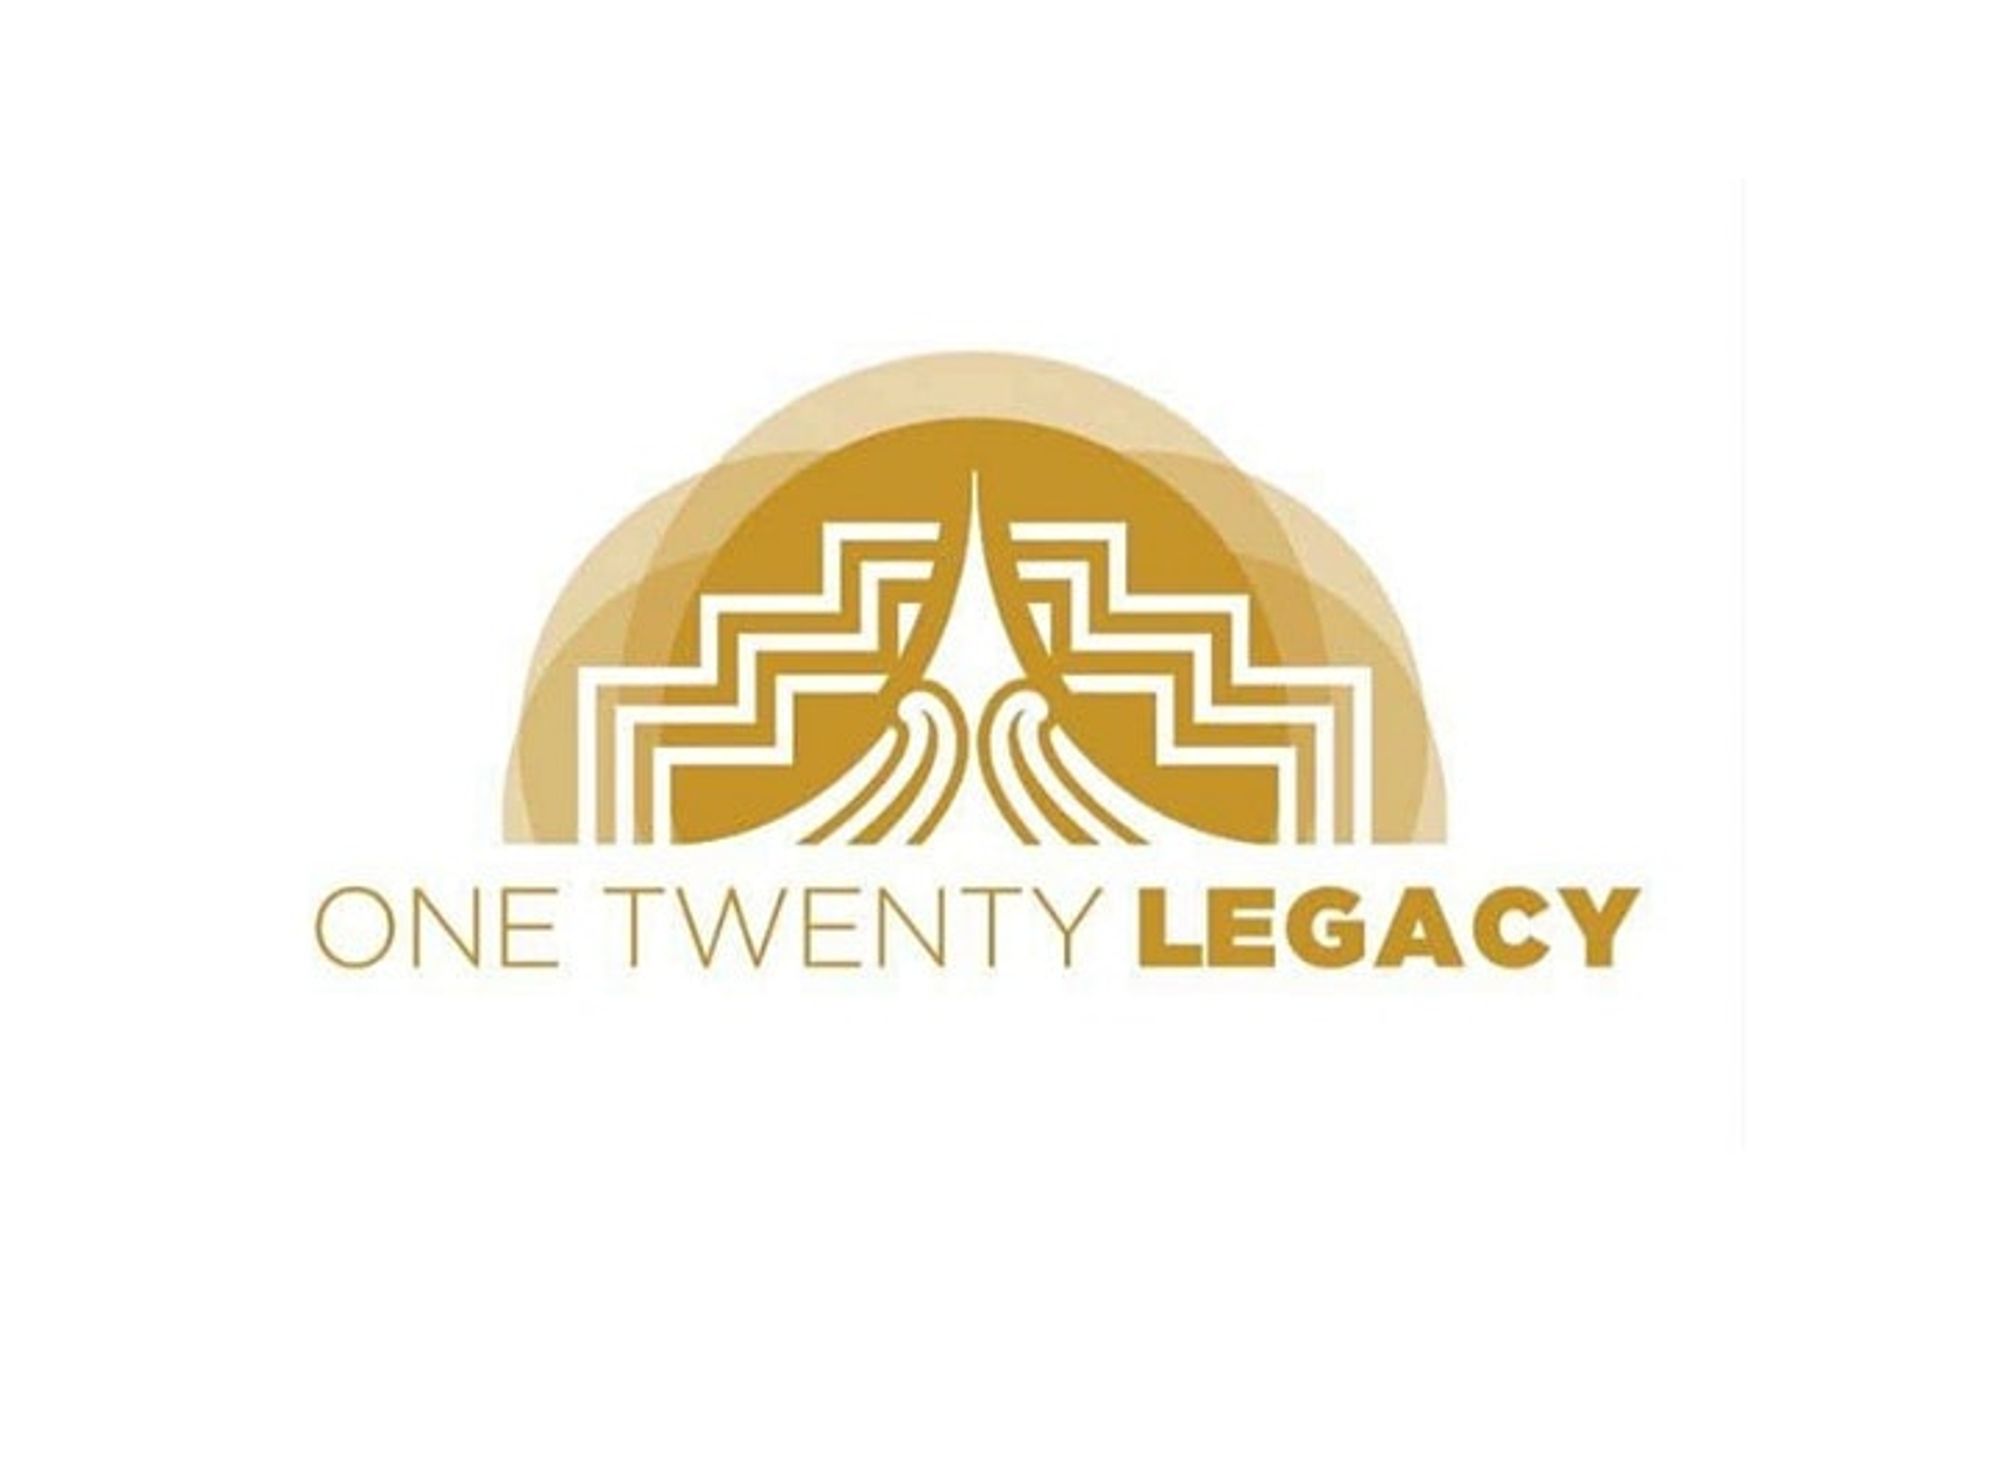 One Twenty Legacy Limited (t/a Ignite Your Gift) 